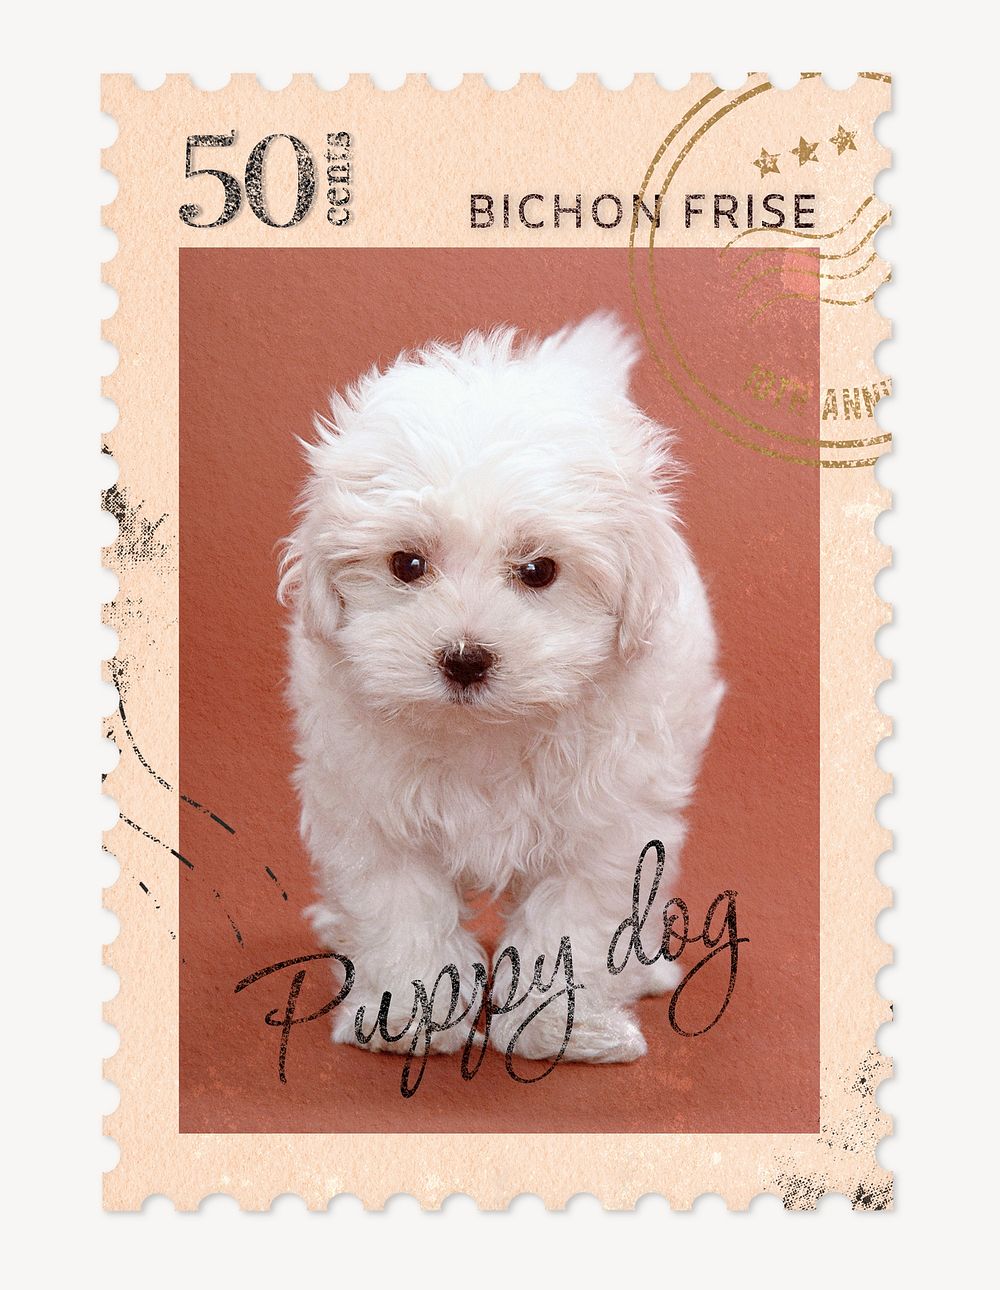 Puppy postage stamp, aesthetic animal graphic